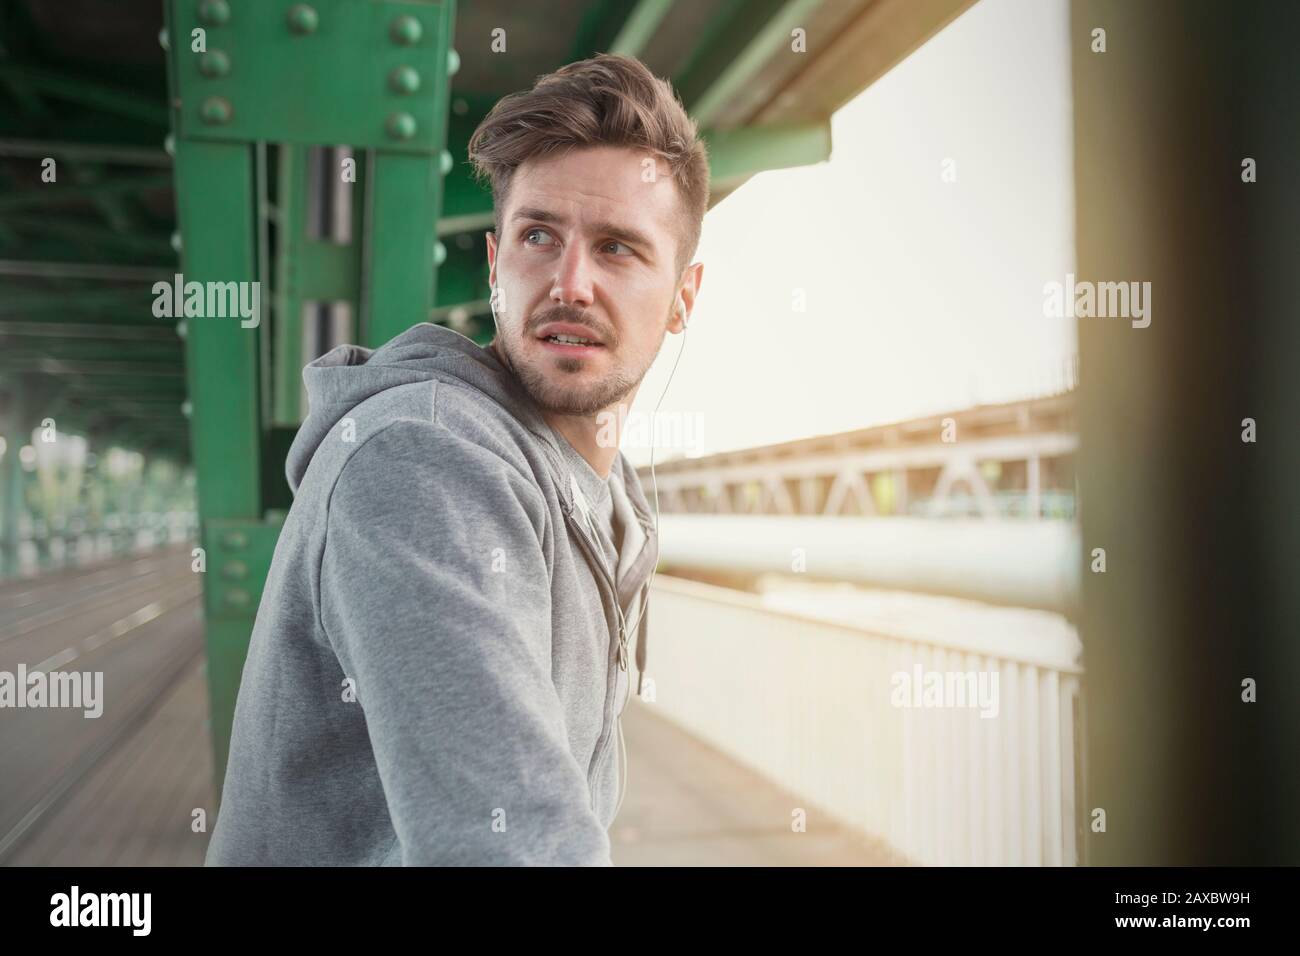 Young male runner with headphones looking over shoulder on train station platform Stock Photo